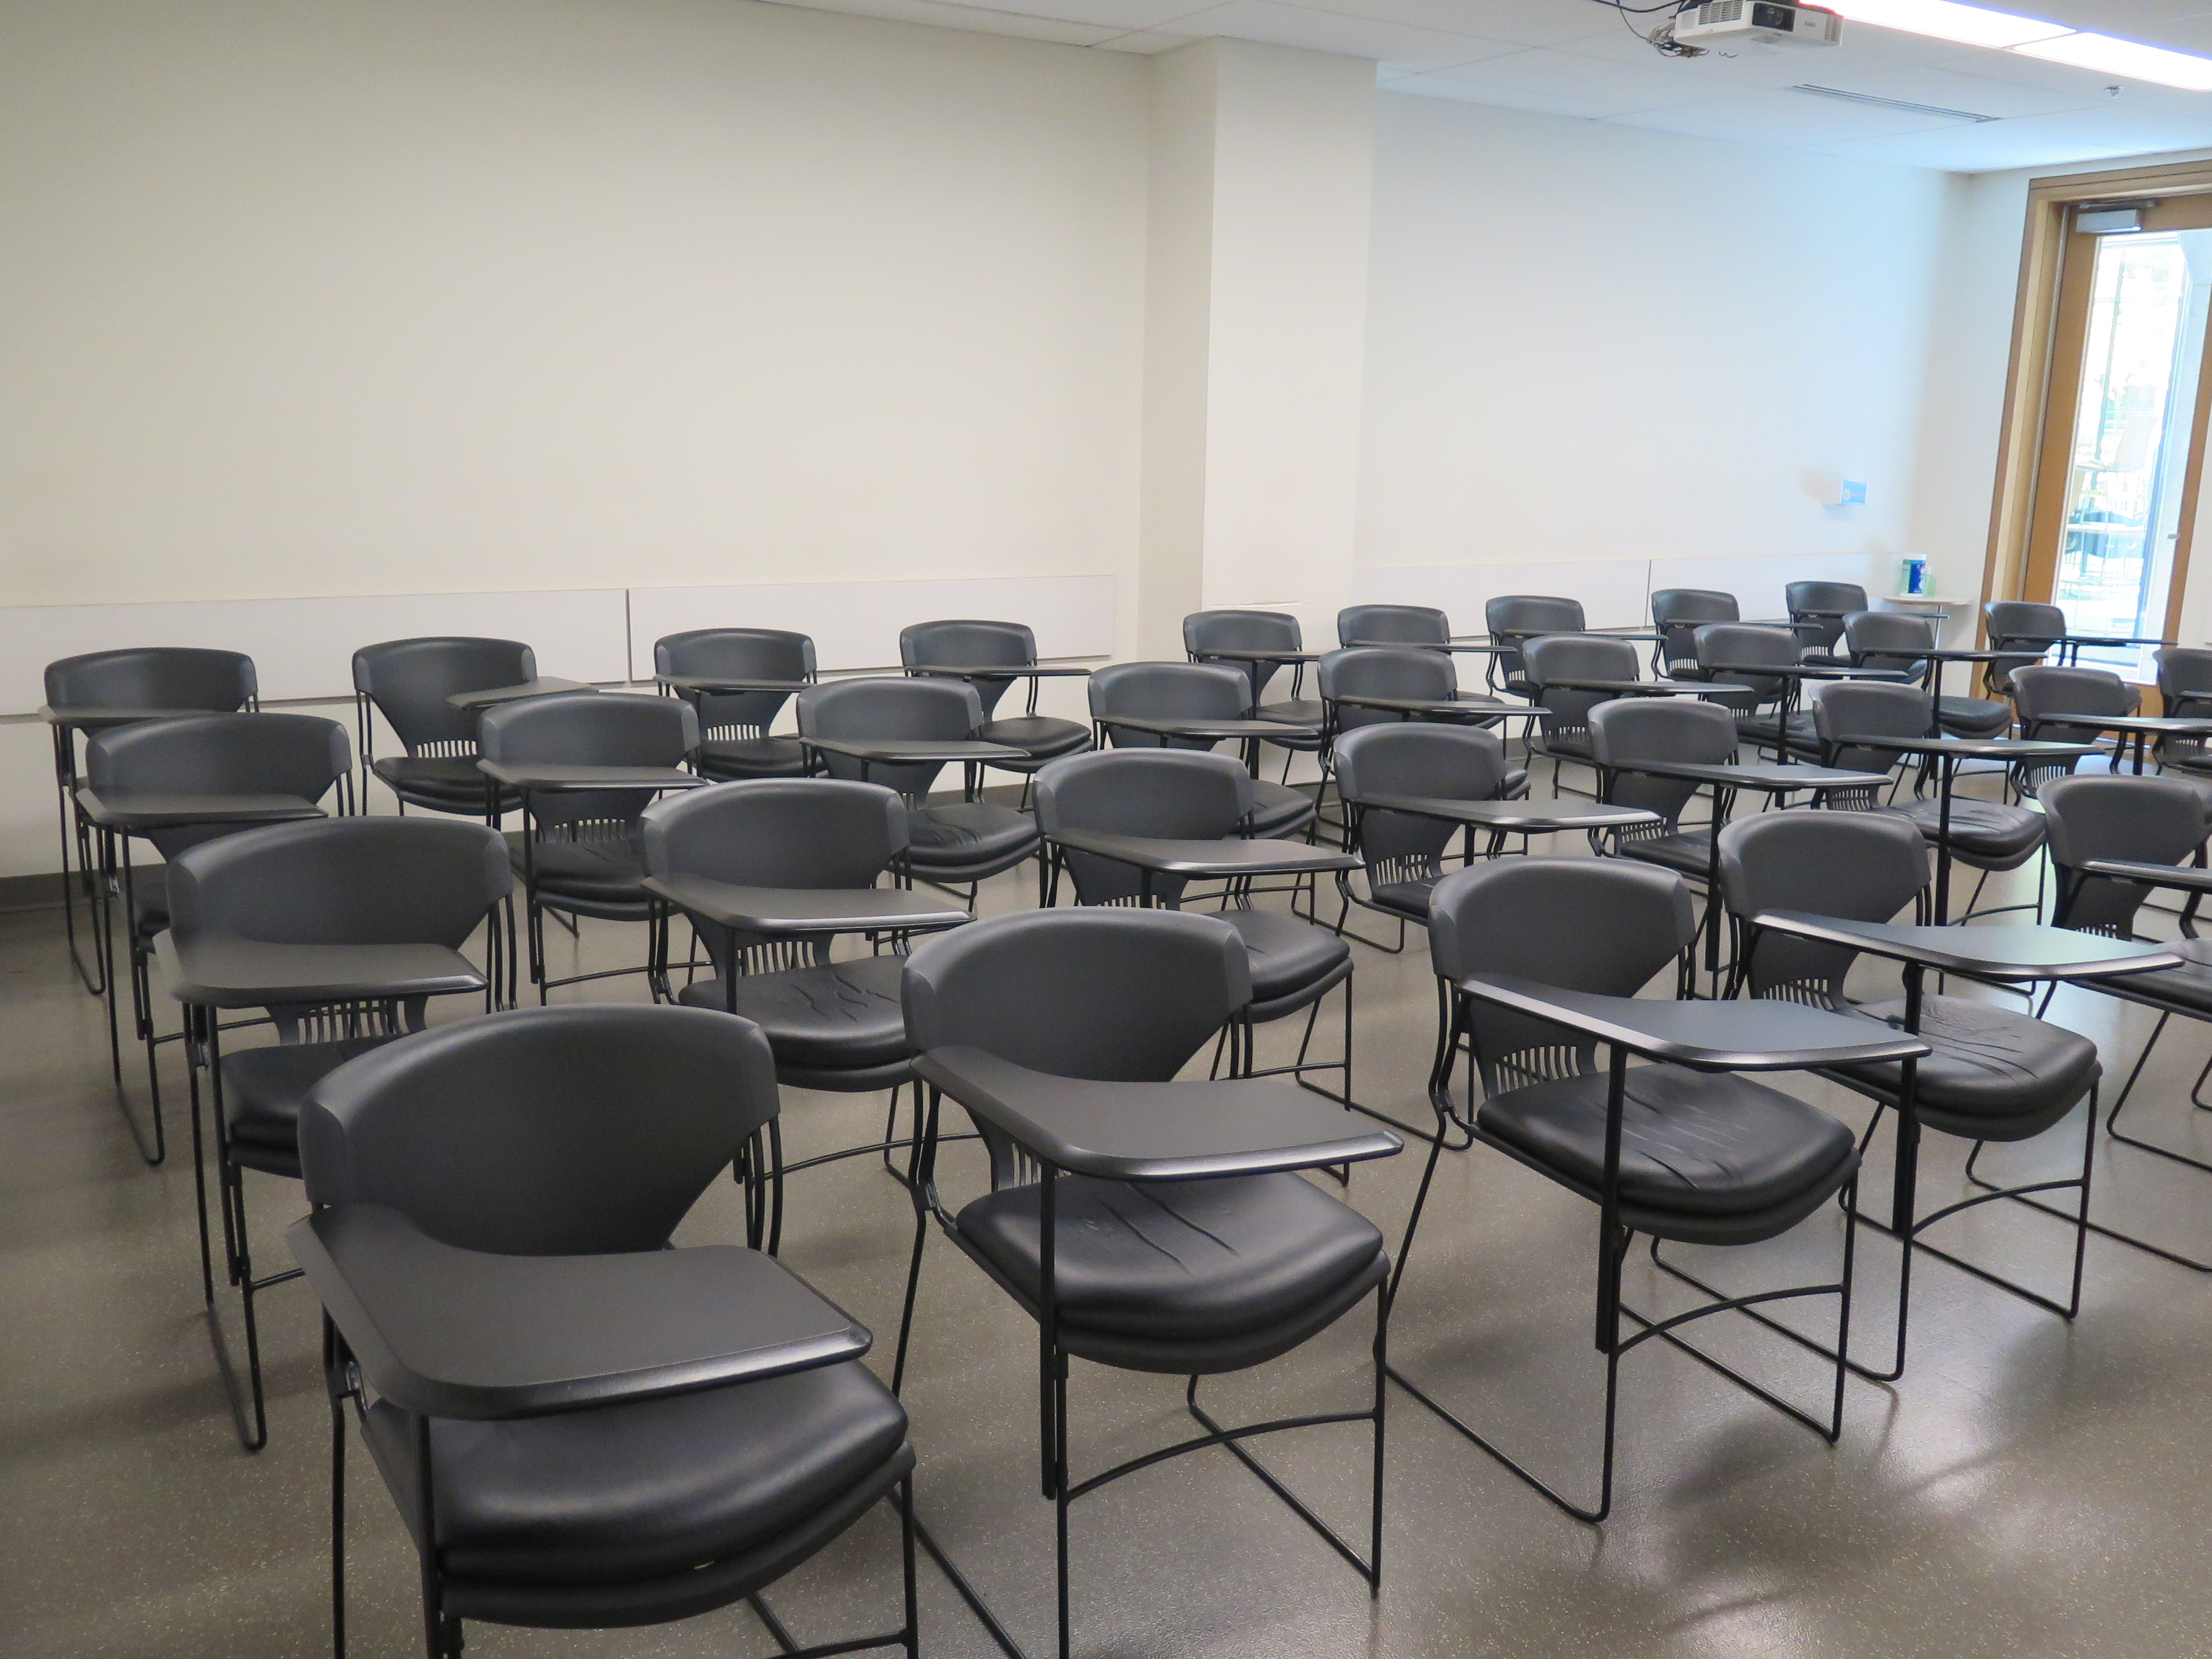 Room Consists of hard floors, moveable tablet armchairs, a white board and podium are both located at the front of the room.